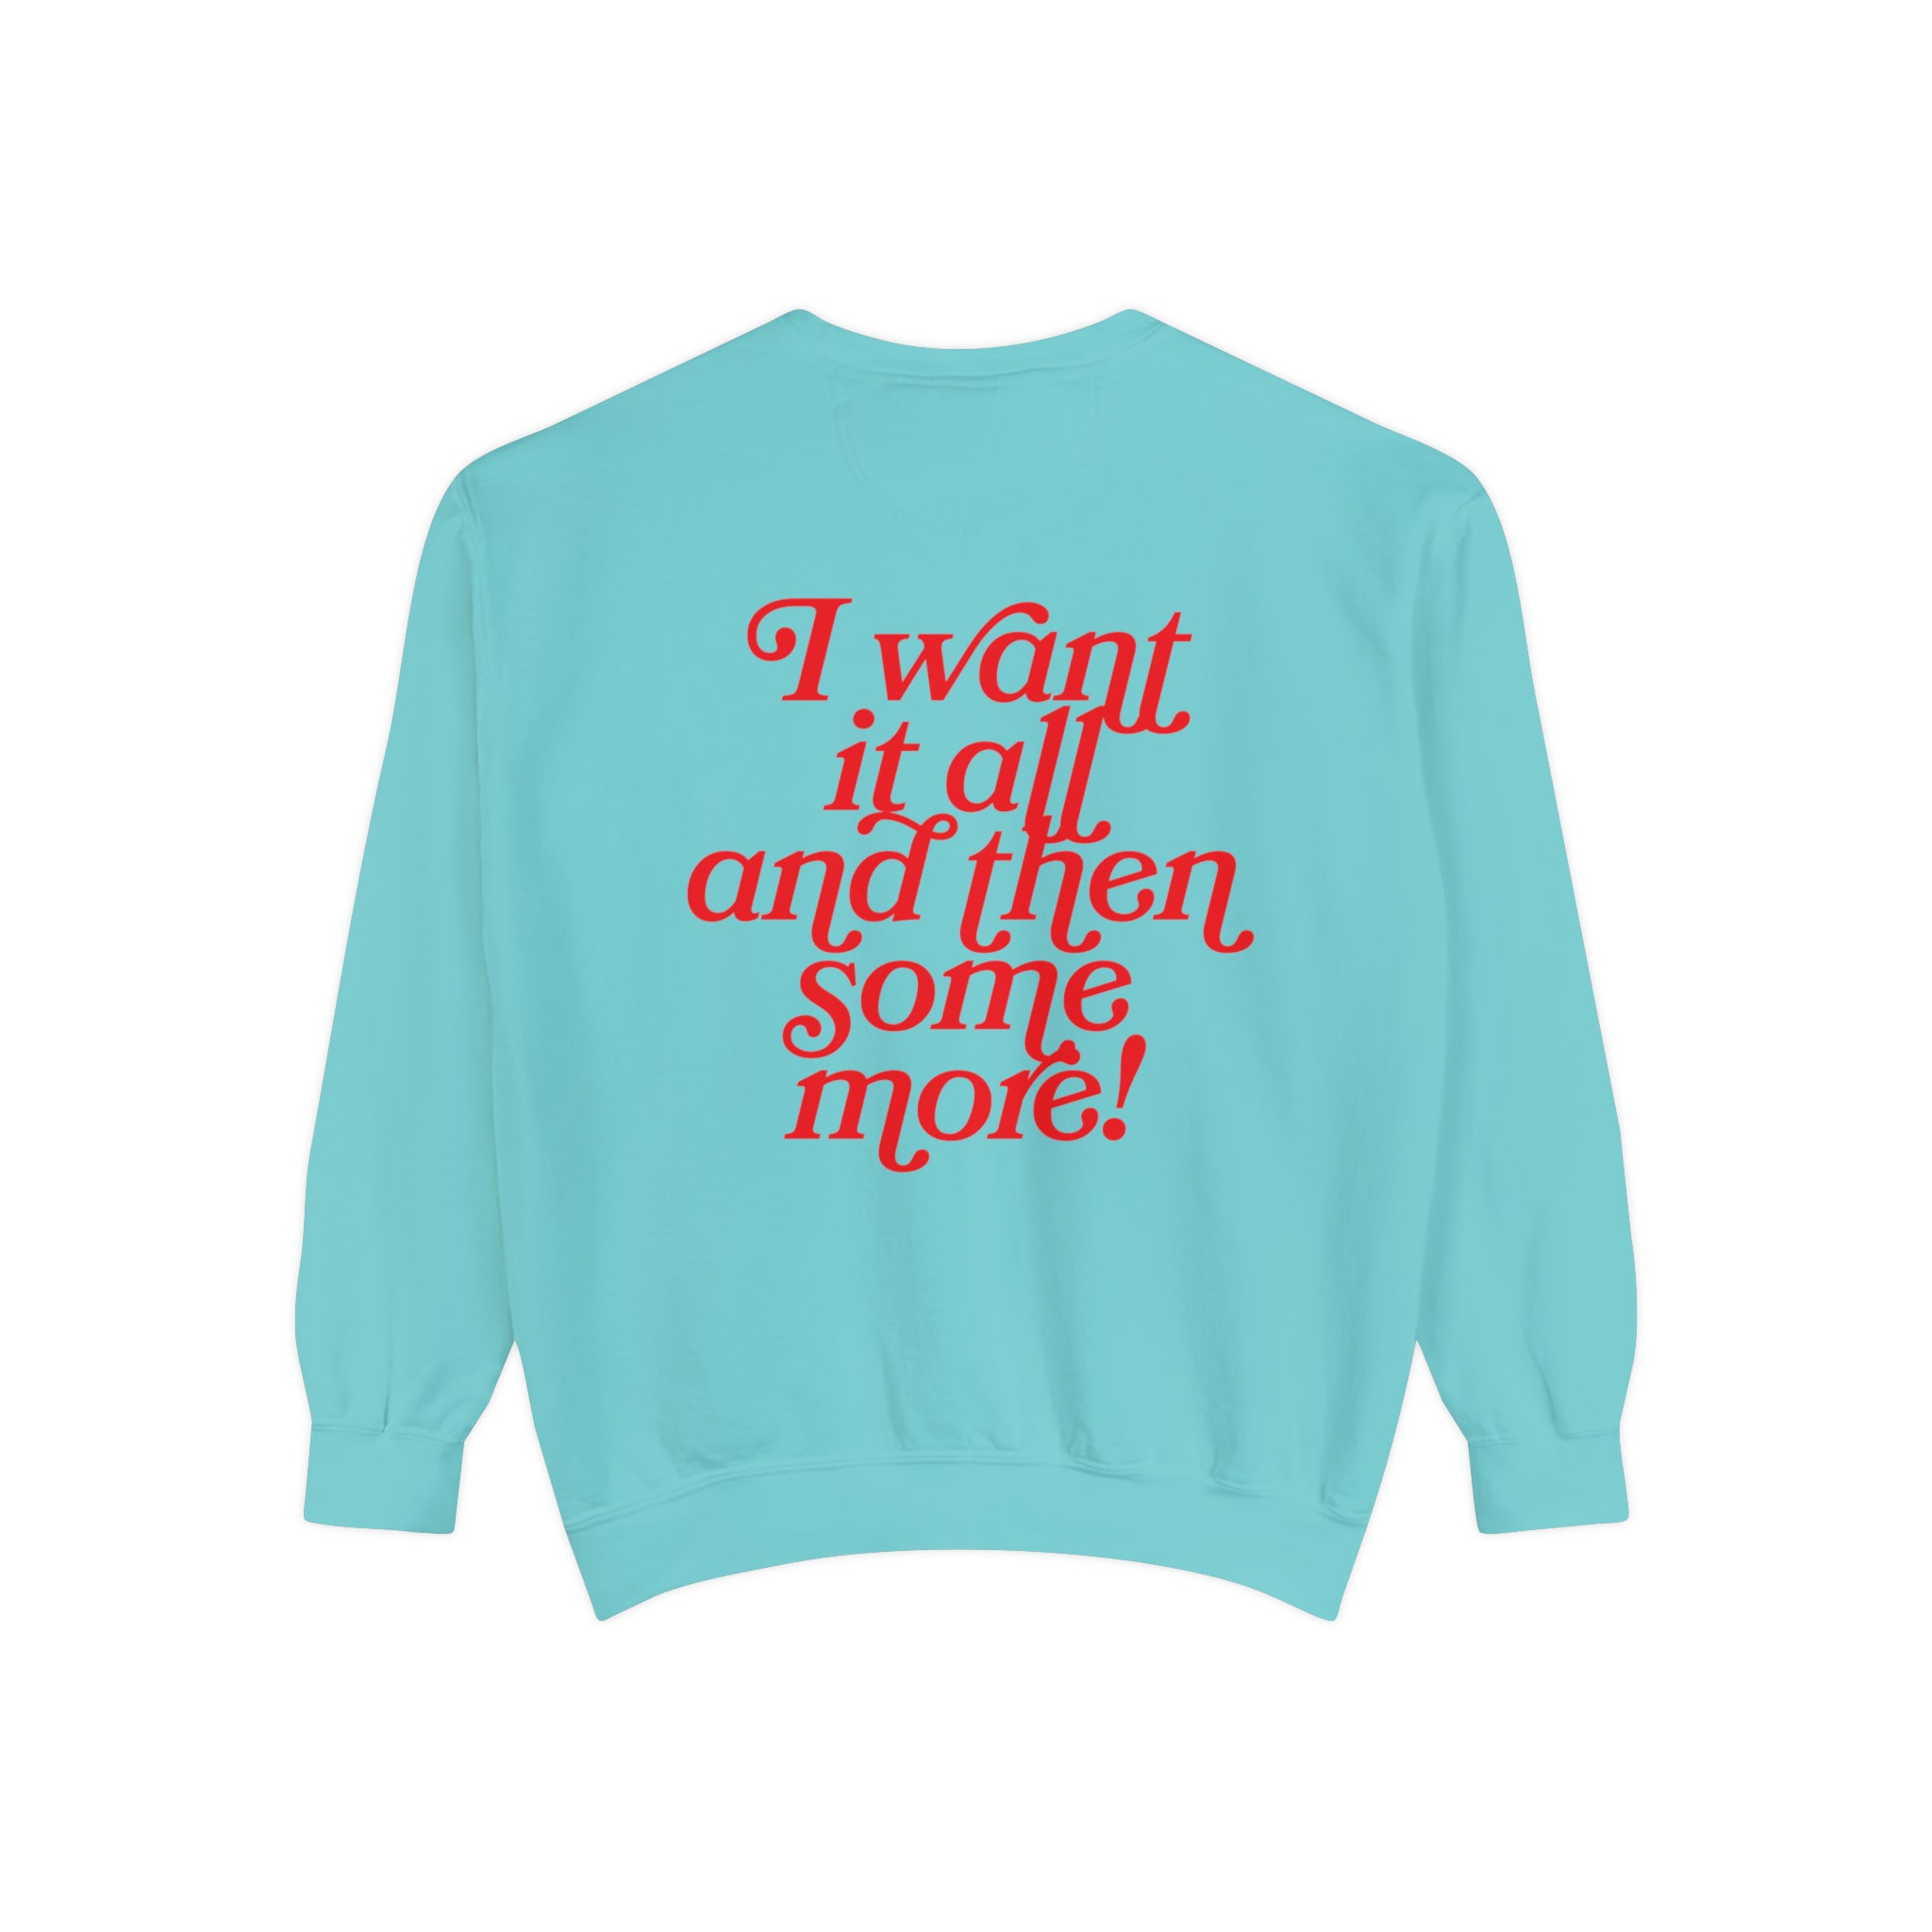 I Want It All And Then Some More Comfort Colors Crewneck Sweatshirt